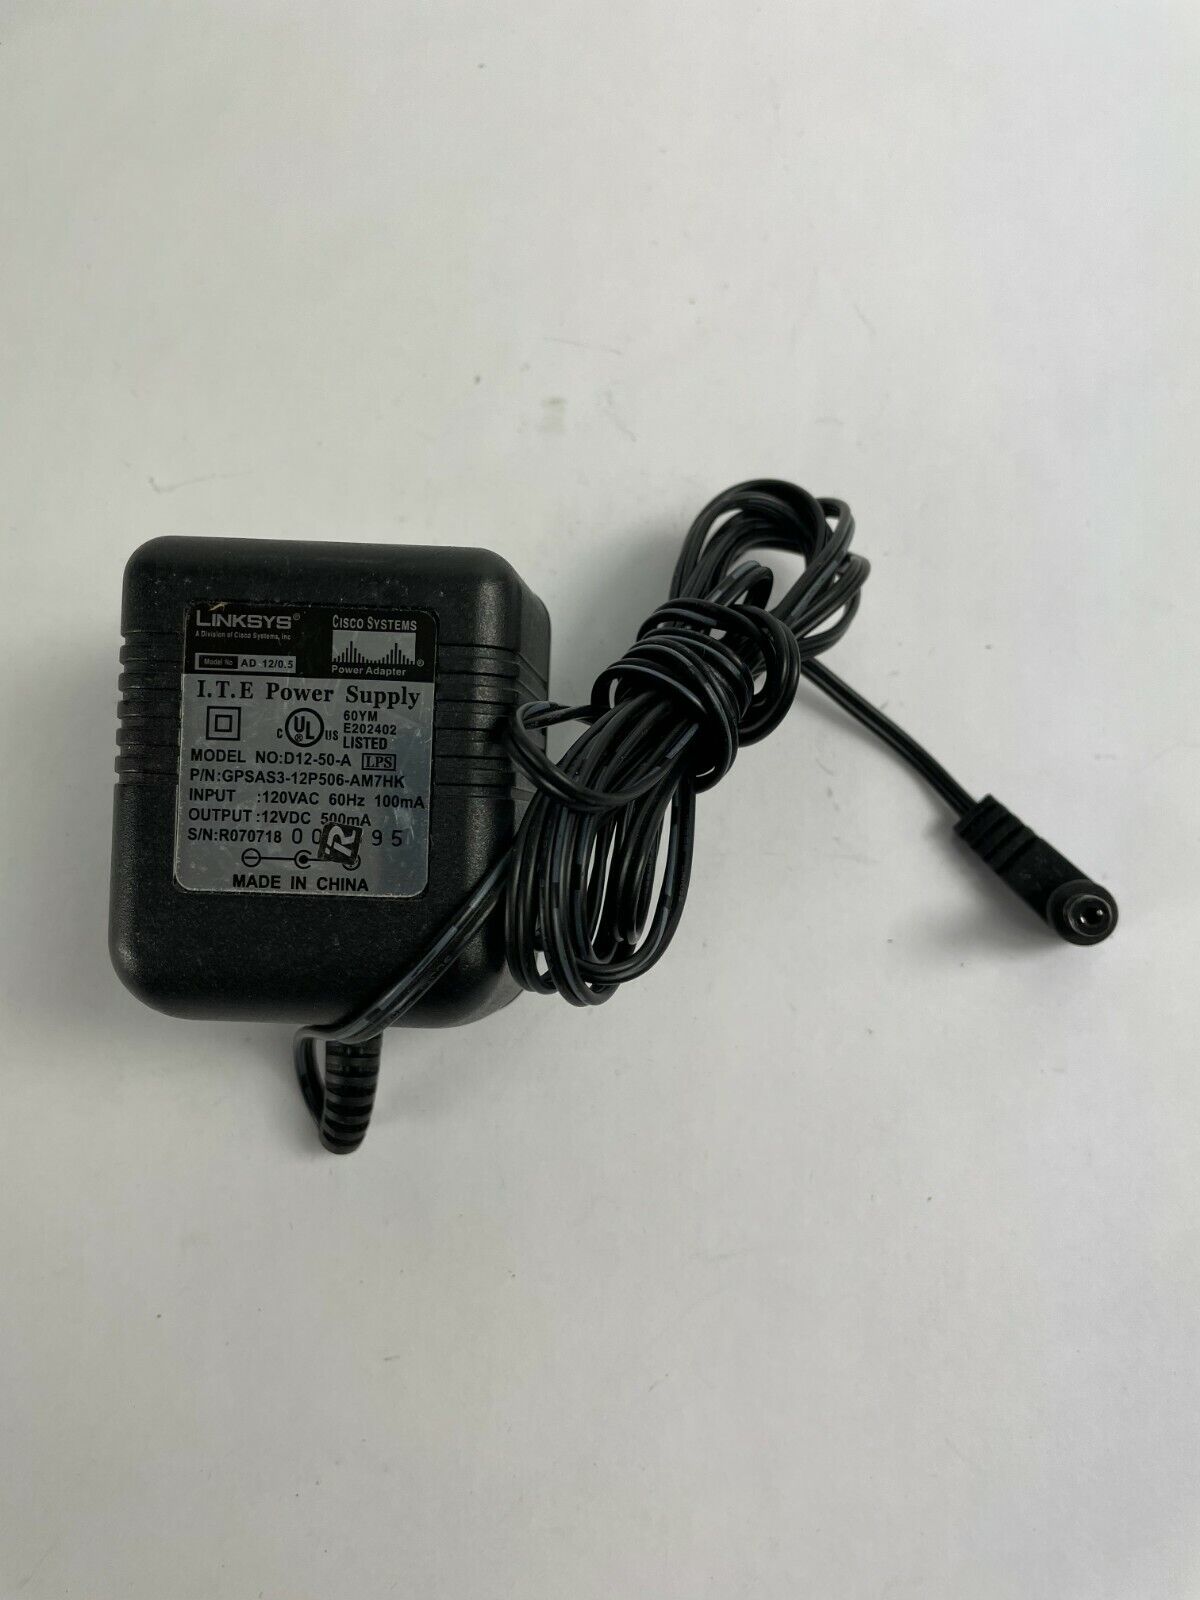 Genuine Linksys Ac Adapter D12-50-A Output 12 V 500mA Power Supply Adapter A91